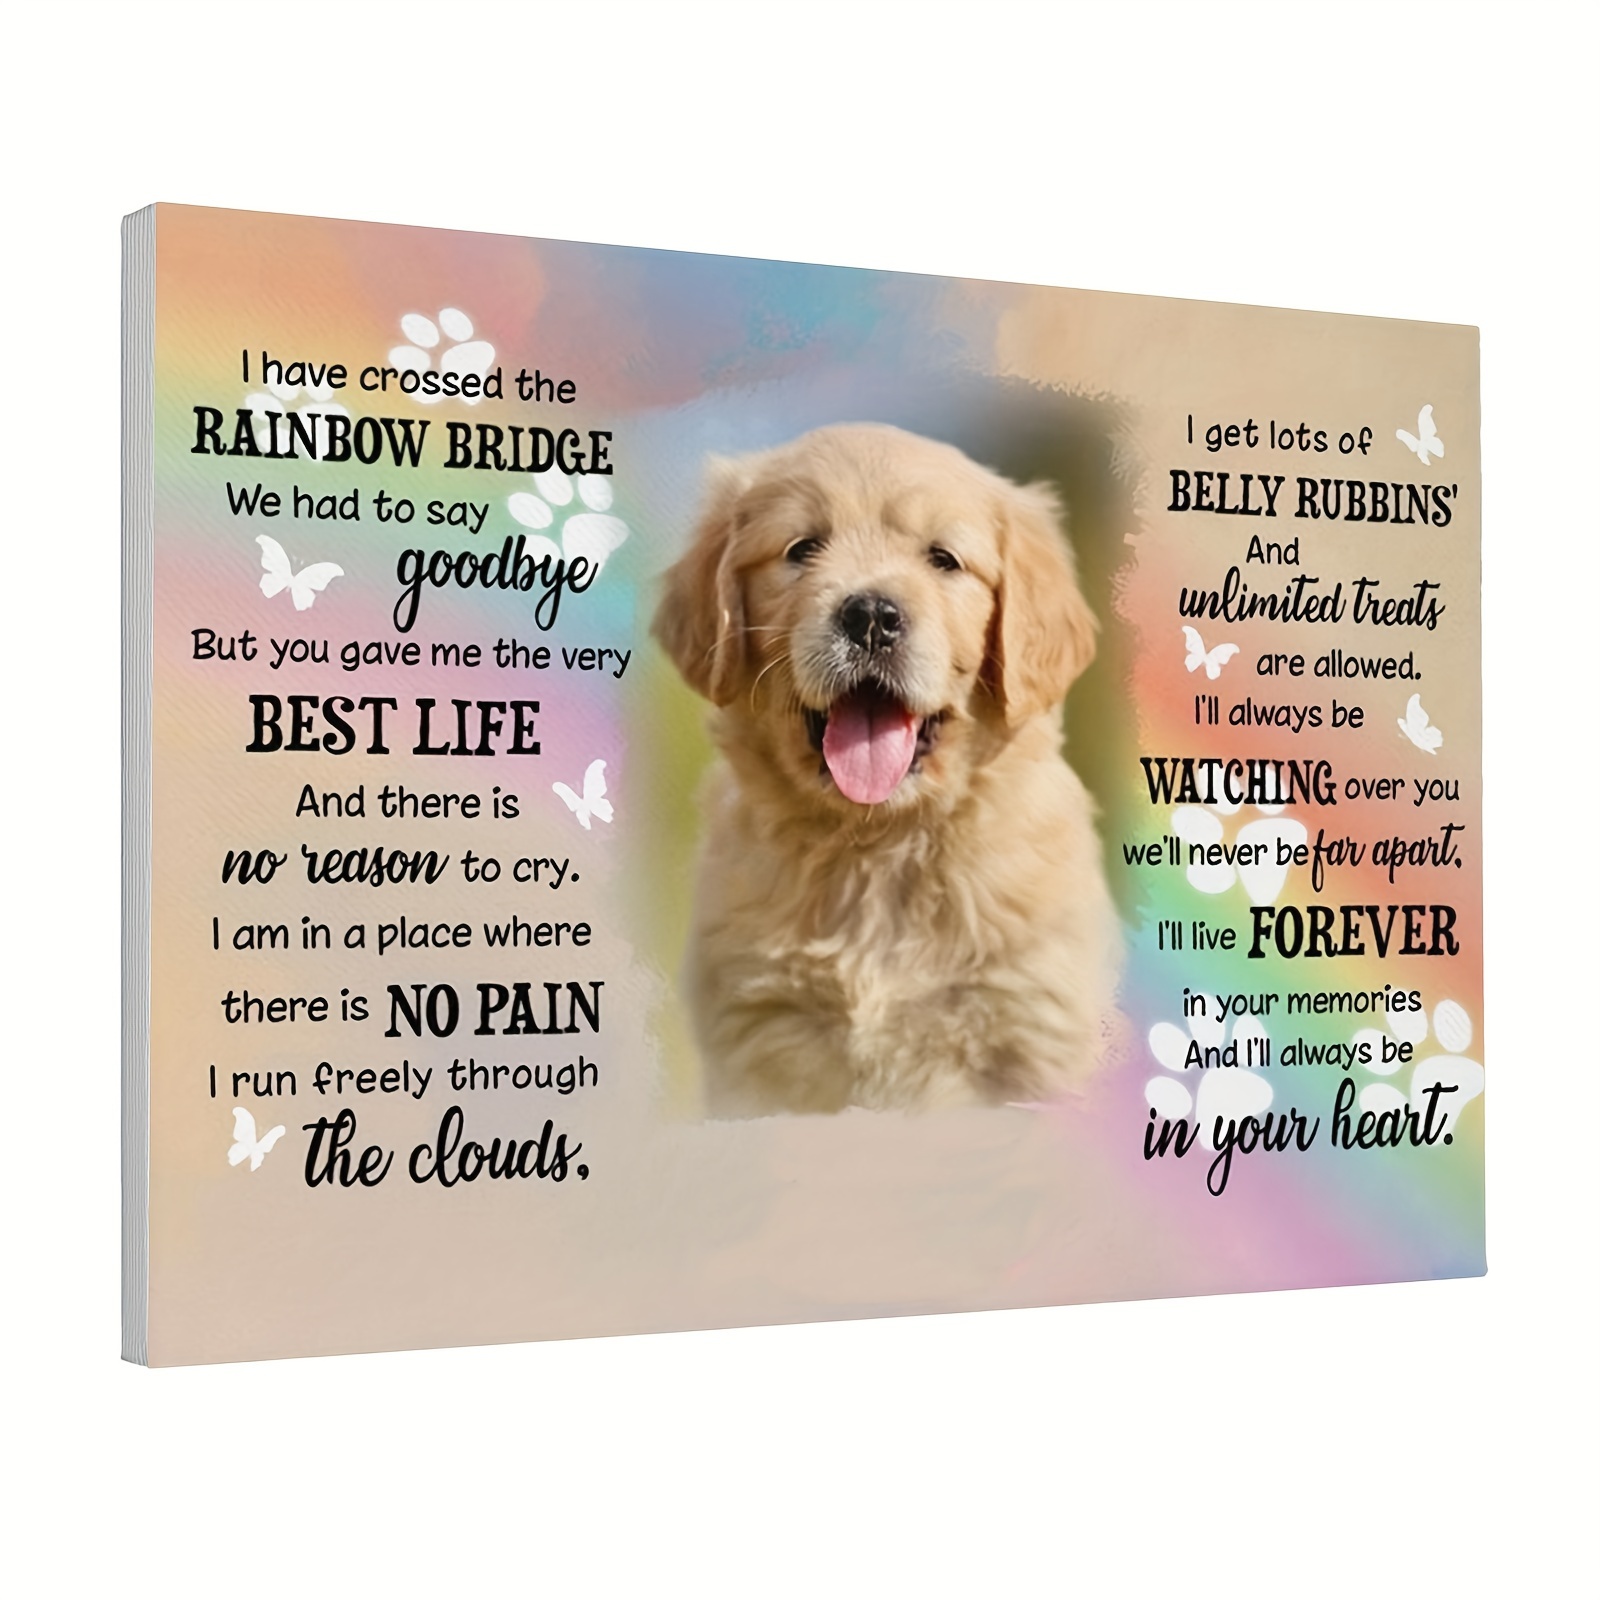 

1pc Wooden Framed Decor, I Have Crossed The Rainbow Bridge Dog Pet Canvas Decor Wall Art For Bedroom Living Room Home Custom Wall Decoration With Frame Ready To Hang 11.8inchx15.7inch